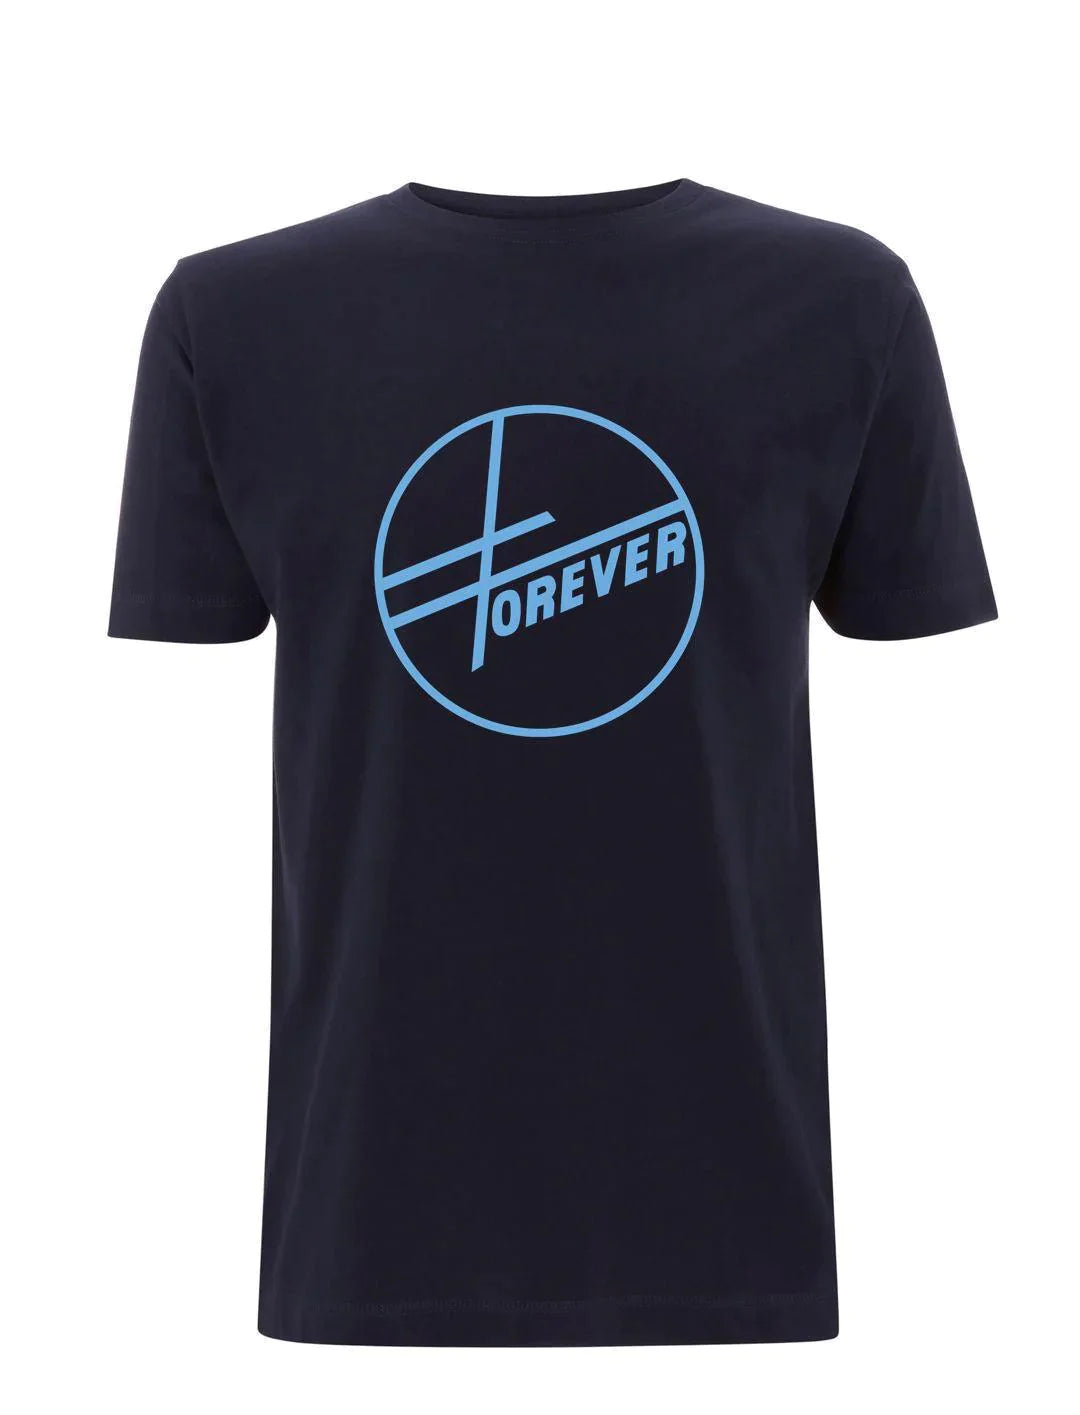 FOREVER: T-Shirt Inspired by Oasis (3 Colours) - SOUND IS COLOUR